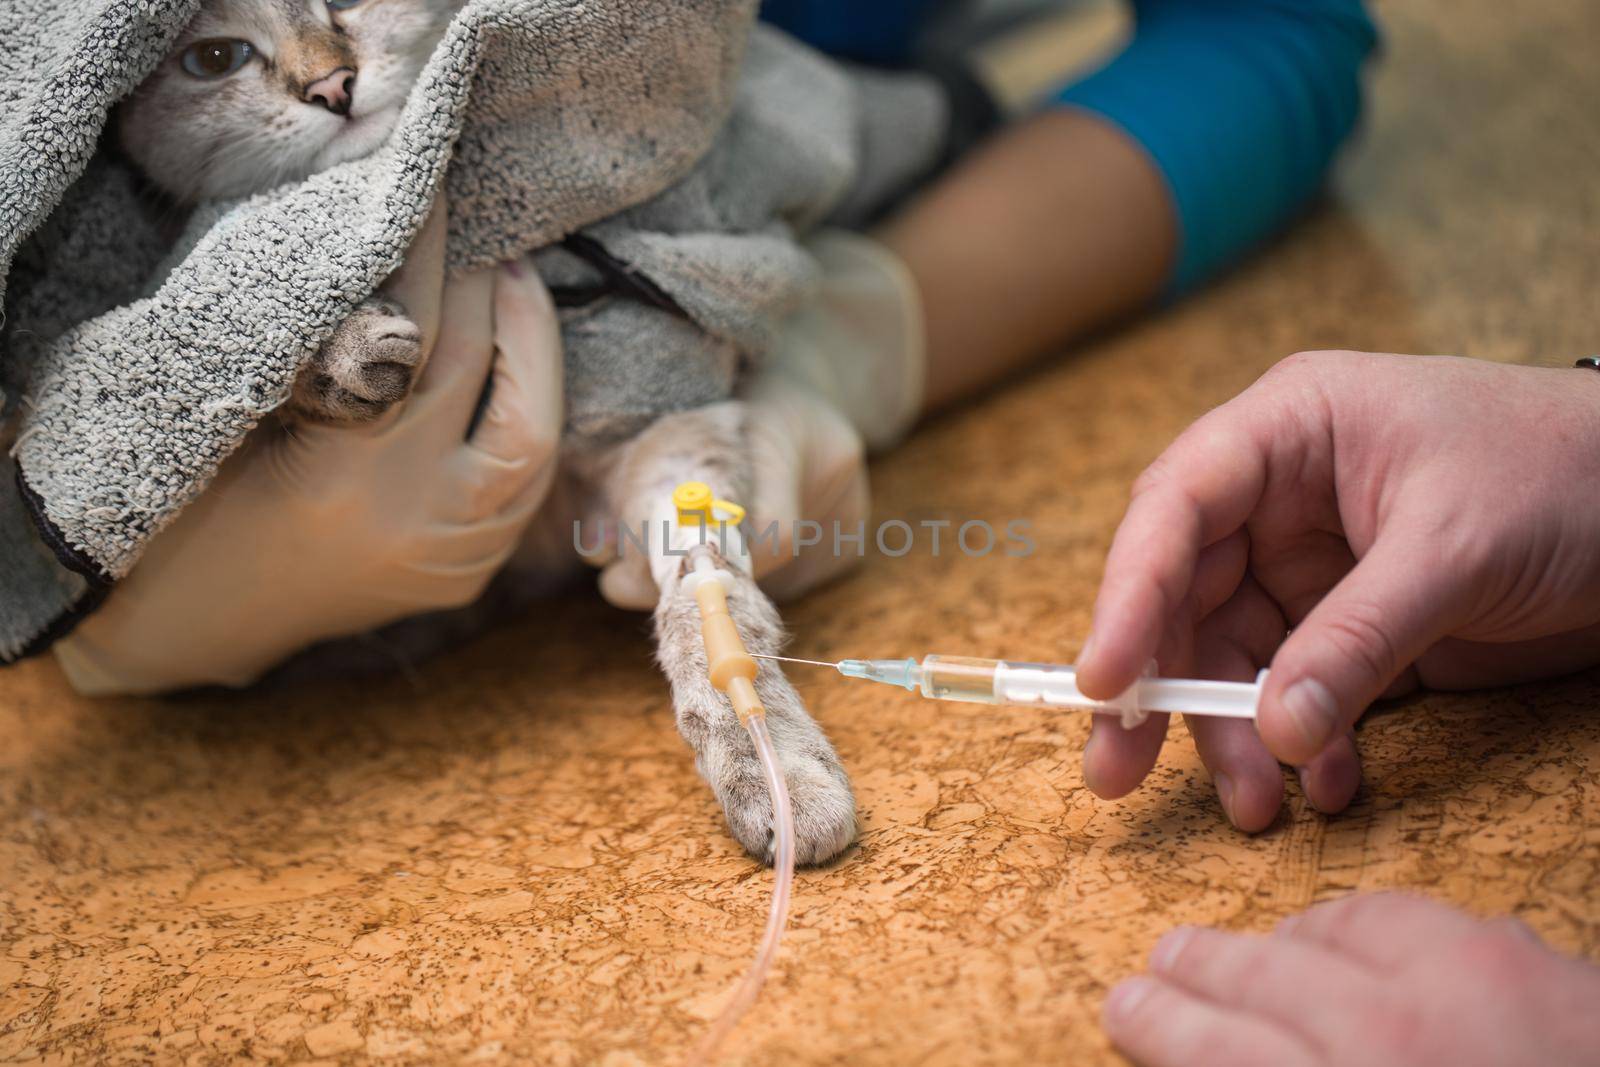 Veterinarian makes an injection to a cat in the catheter